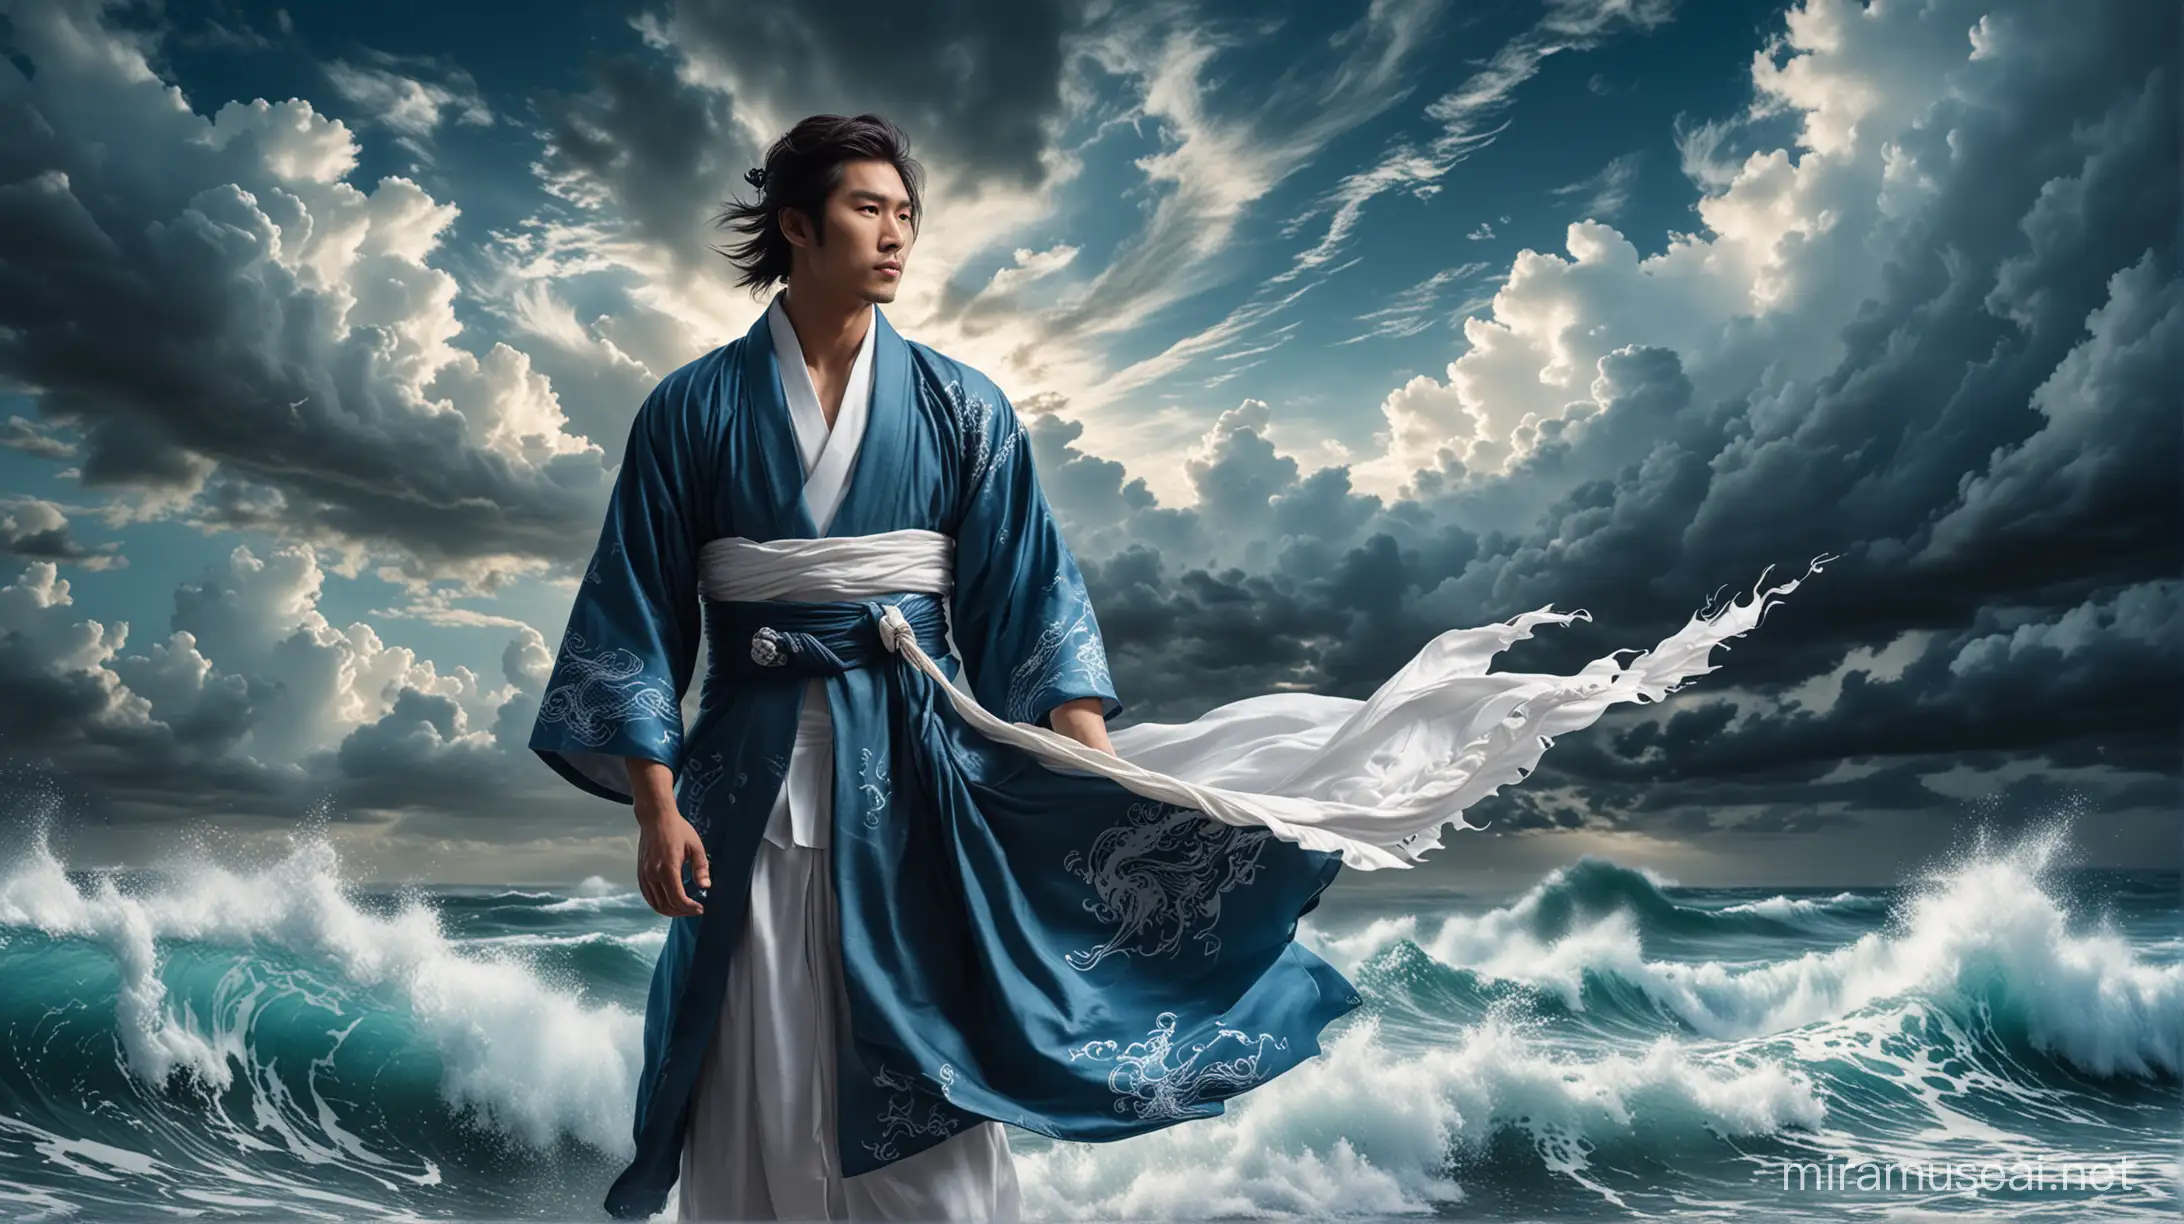 Mystical Asian Man in Hakama Surrounded by Azure Dragon and Clouds